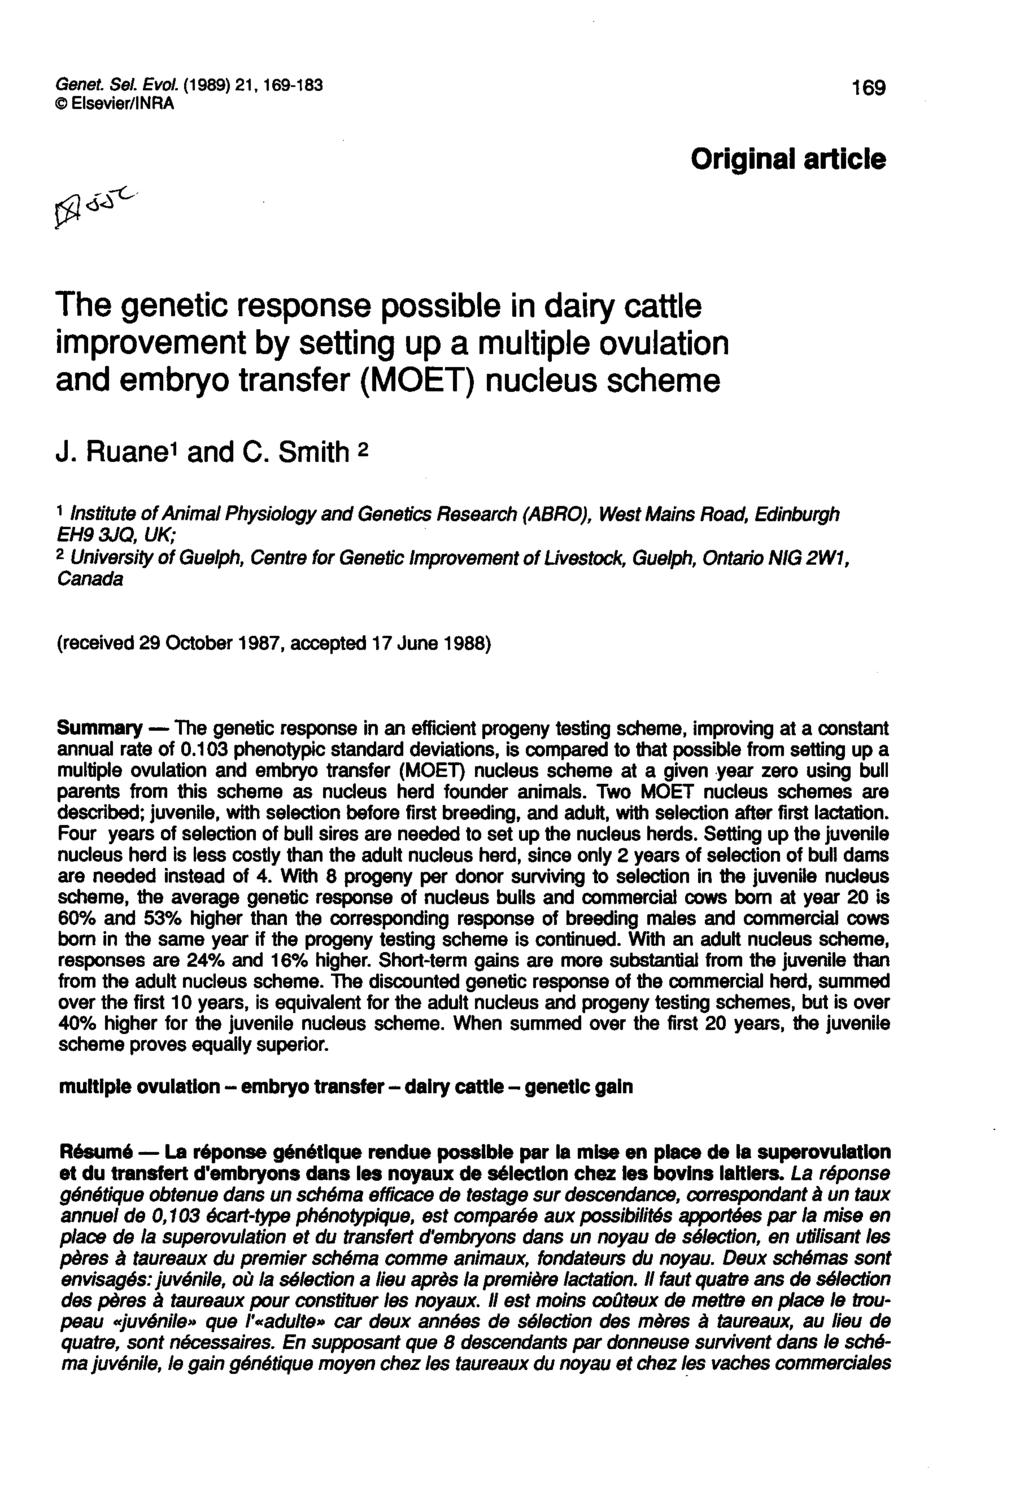 Original article The genetic response possible in dairy cattle improvement by setting up a multiple ovulation and embryo transfer (MOET) nucleus scheme J. Ruane C.